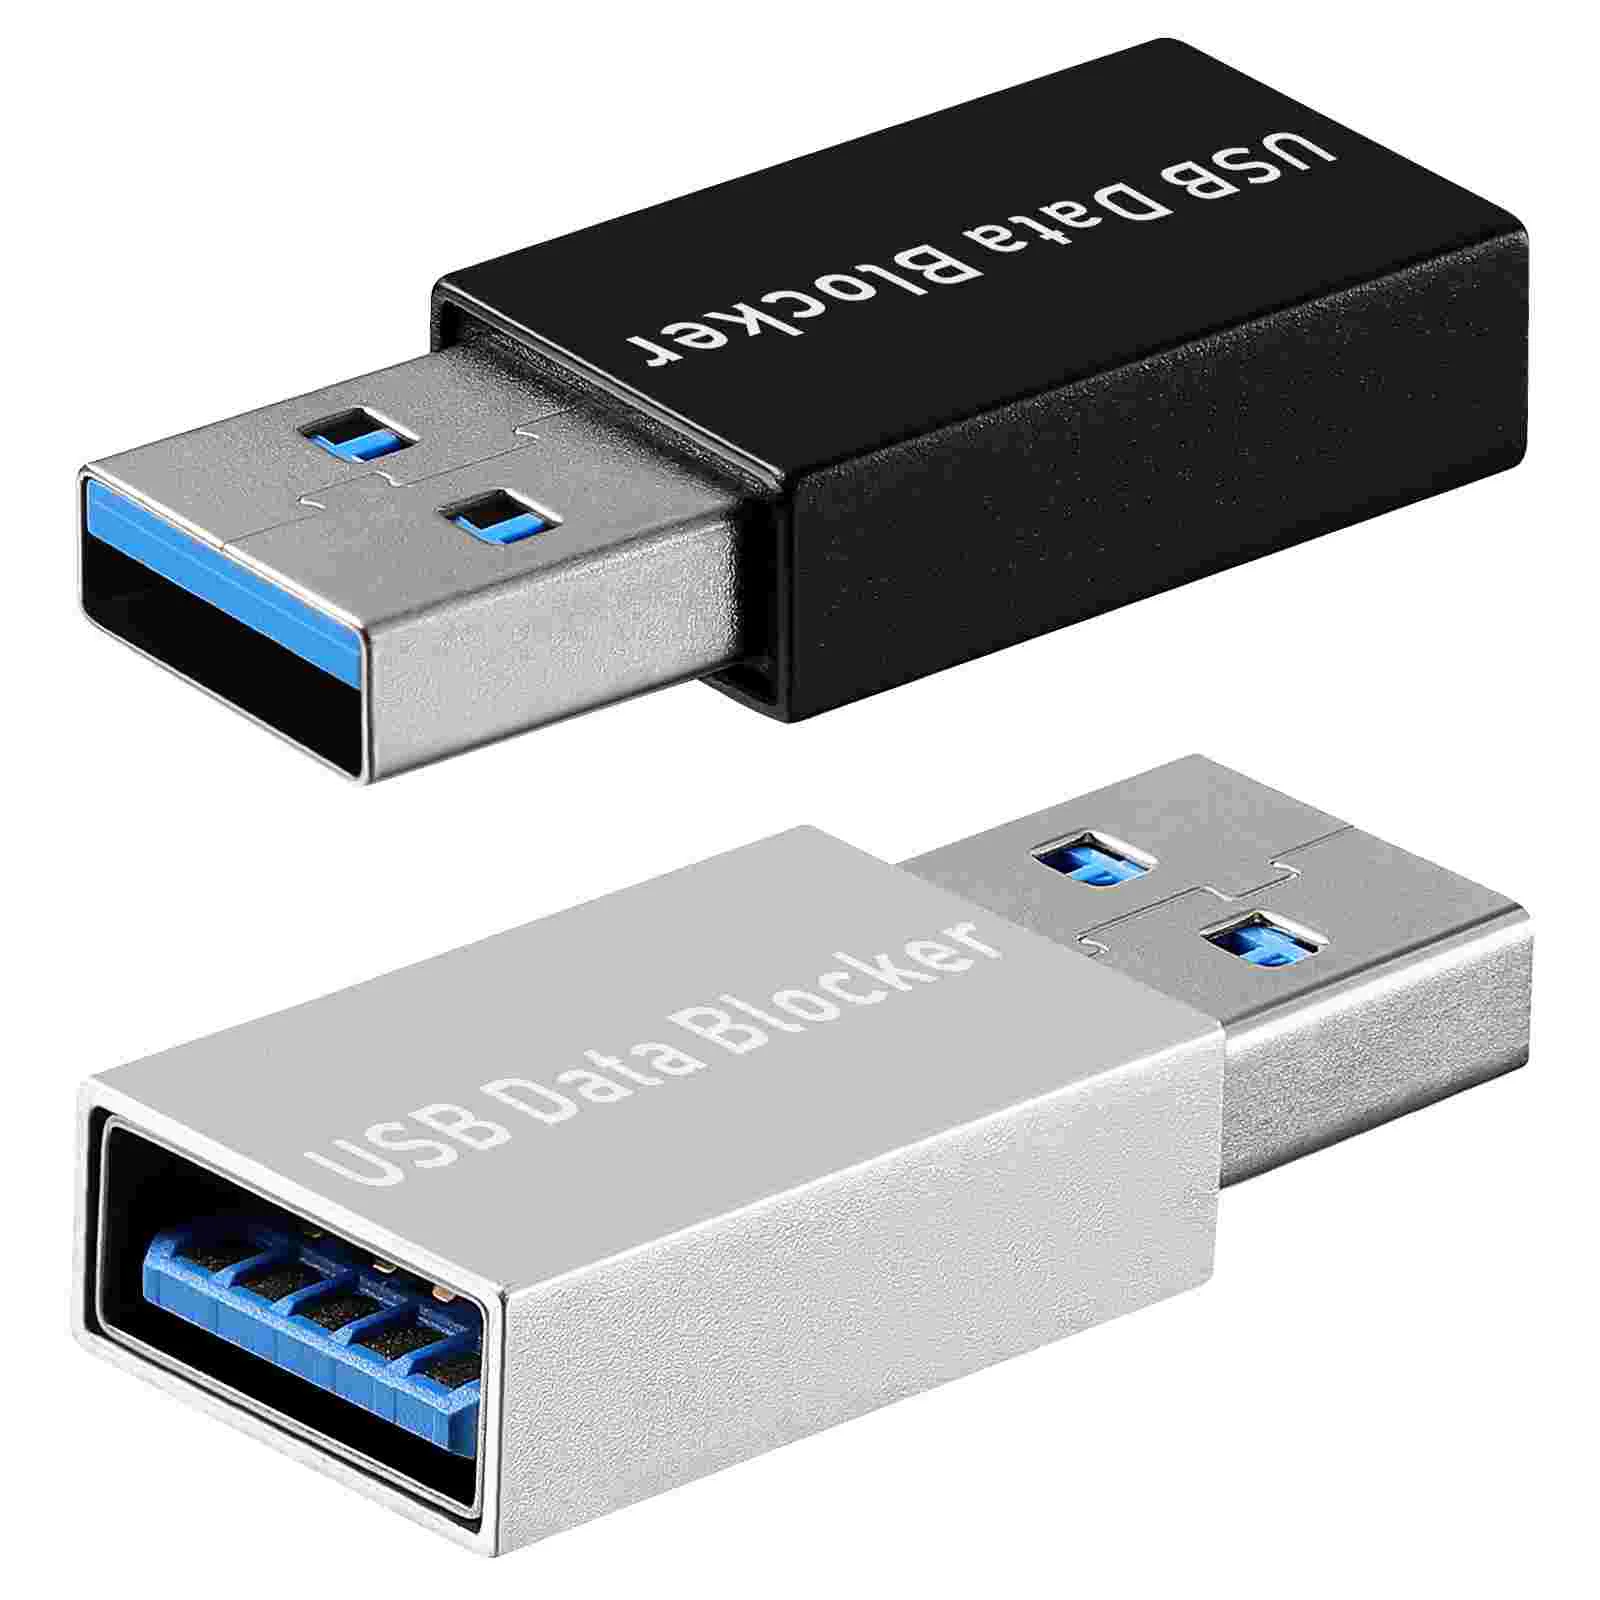 

2pcs Usb Write Blocker Hacking Prevention Adapter USB Blocker Adapter for Blocking Data Sync USB Charge Adapter